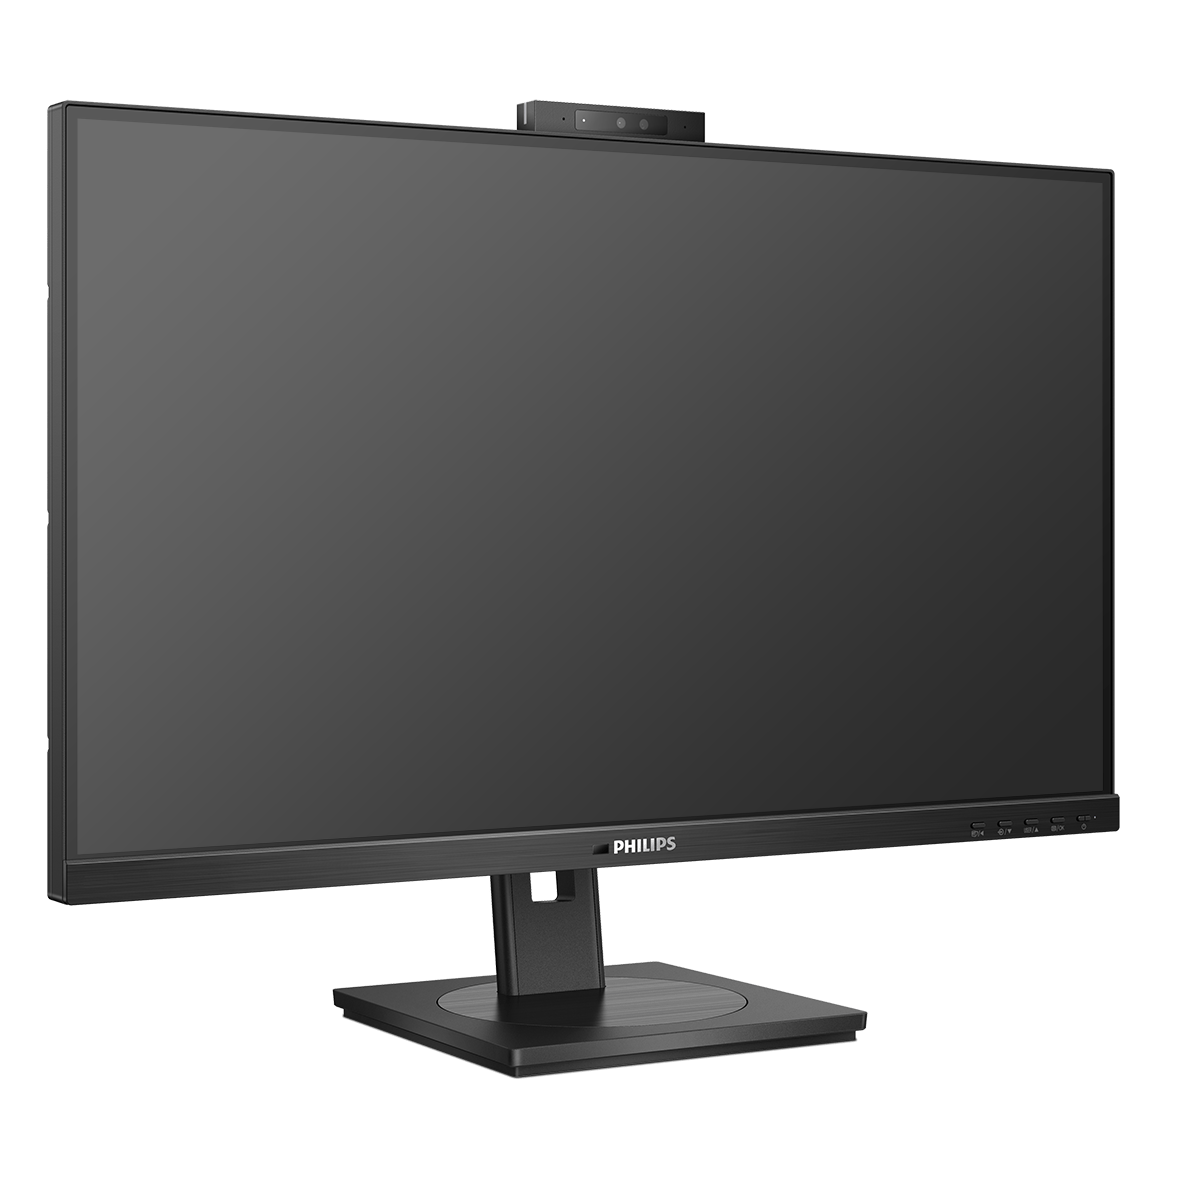 Philips Monitors: New models with USB-C docking and webcam